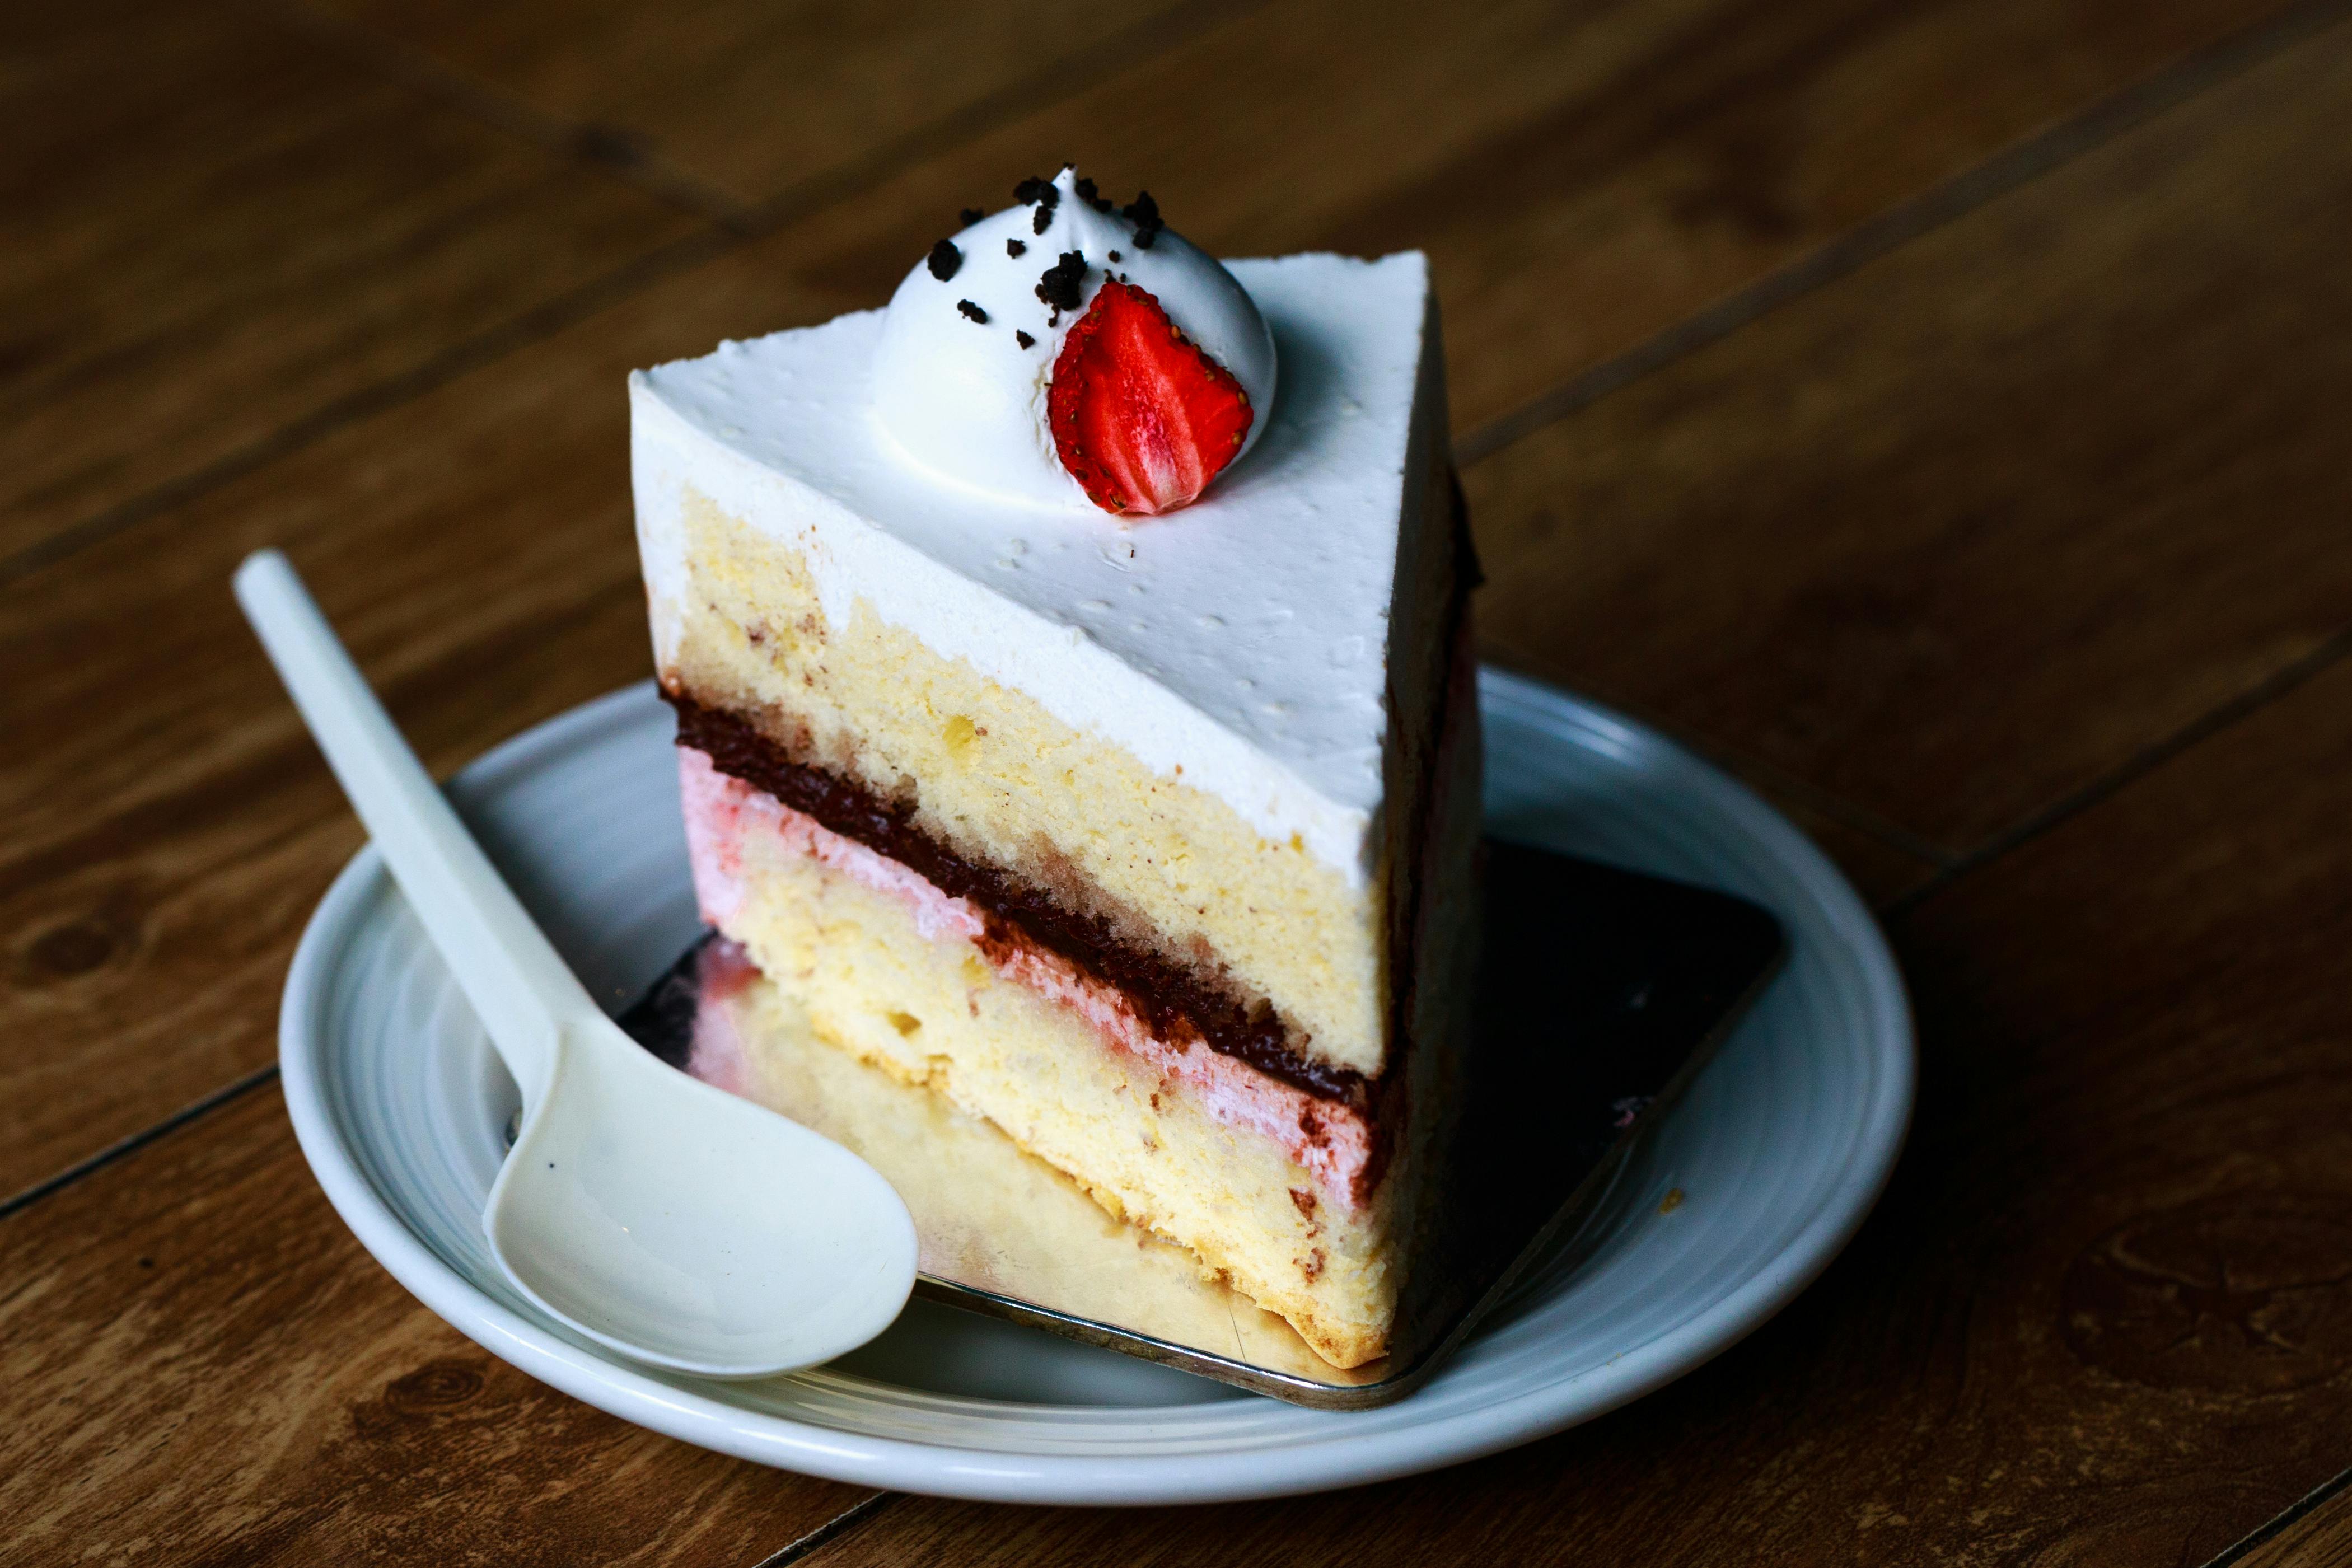 A slice of cake with a strawberry on top